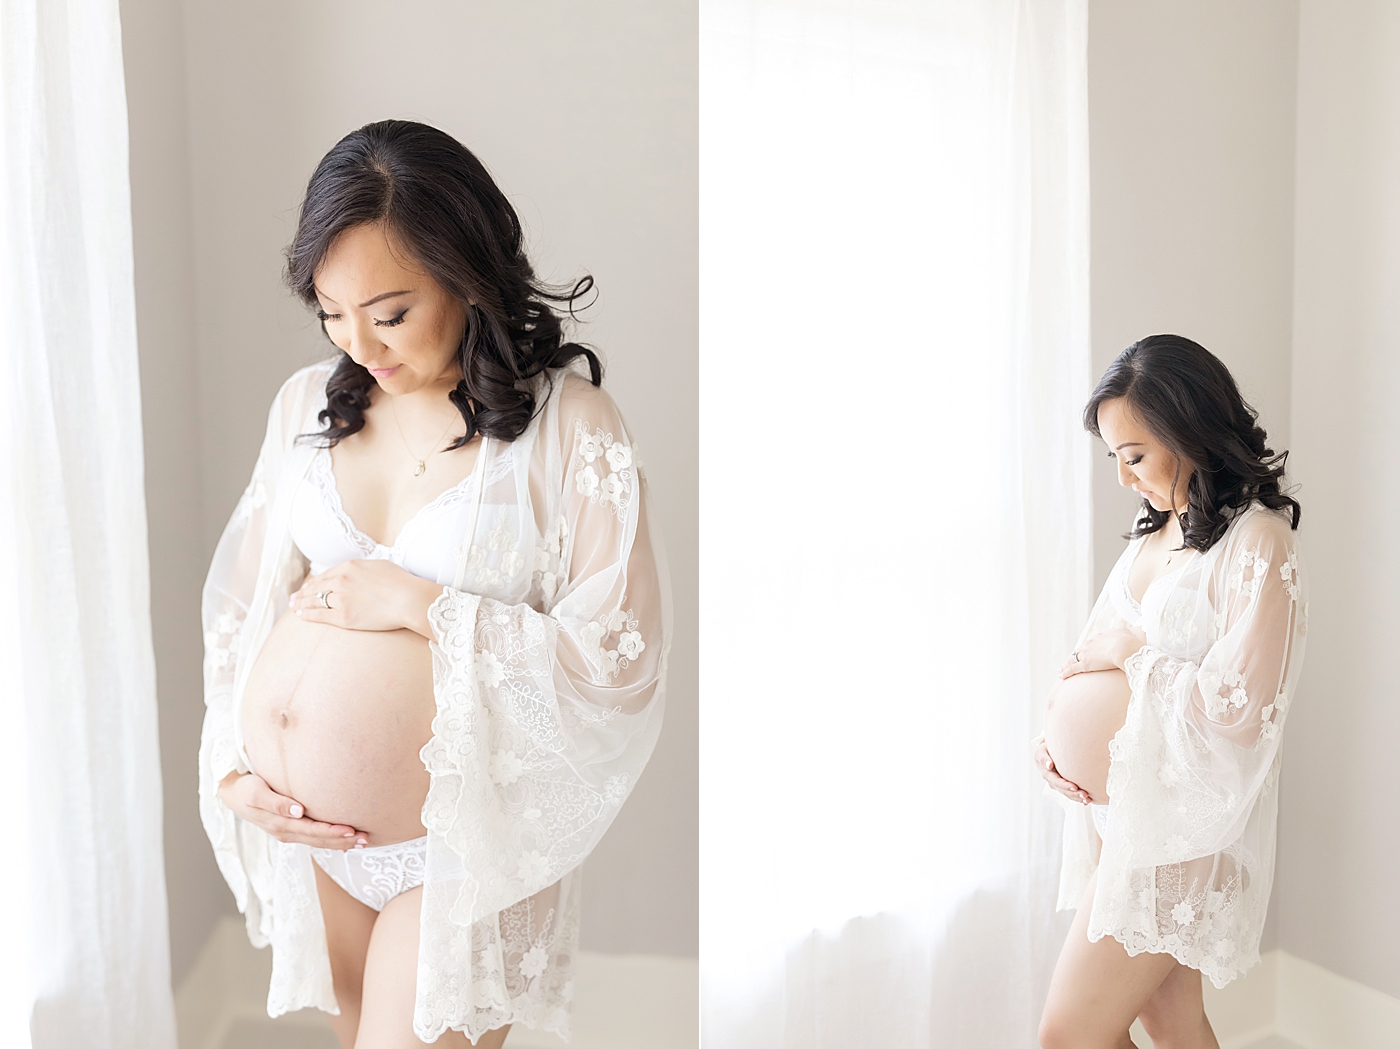 Mom wearing a lace robe for intimate boudoir maternity photos. Photos by Fresh Light Photography.